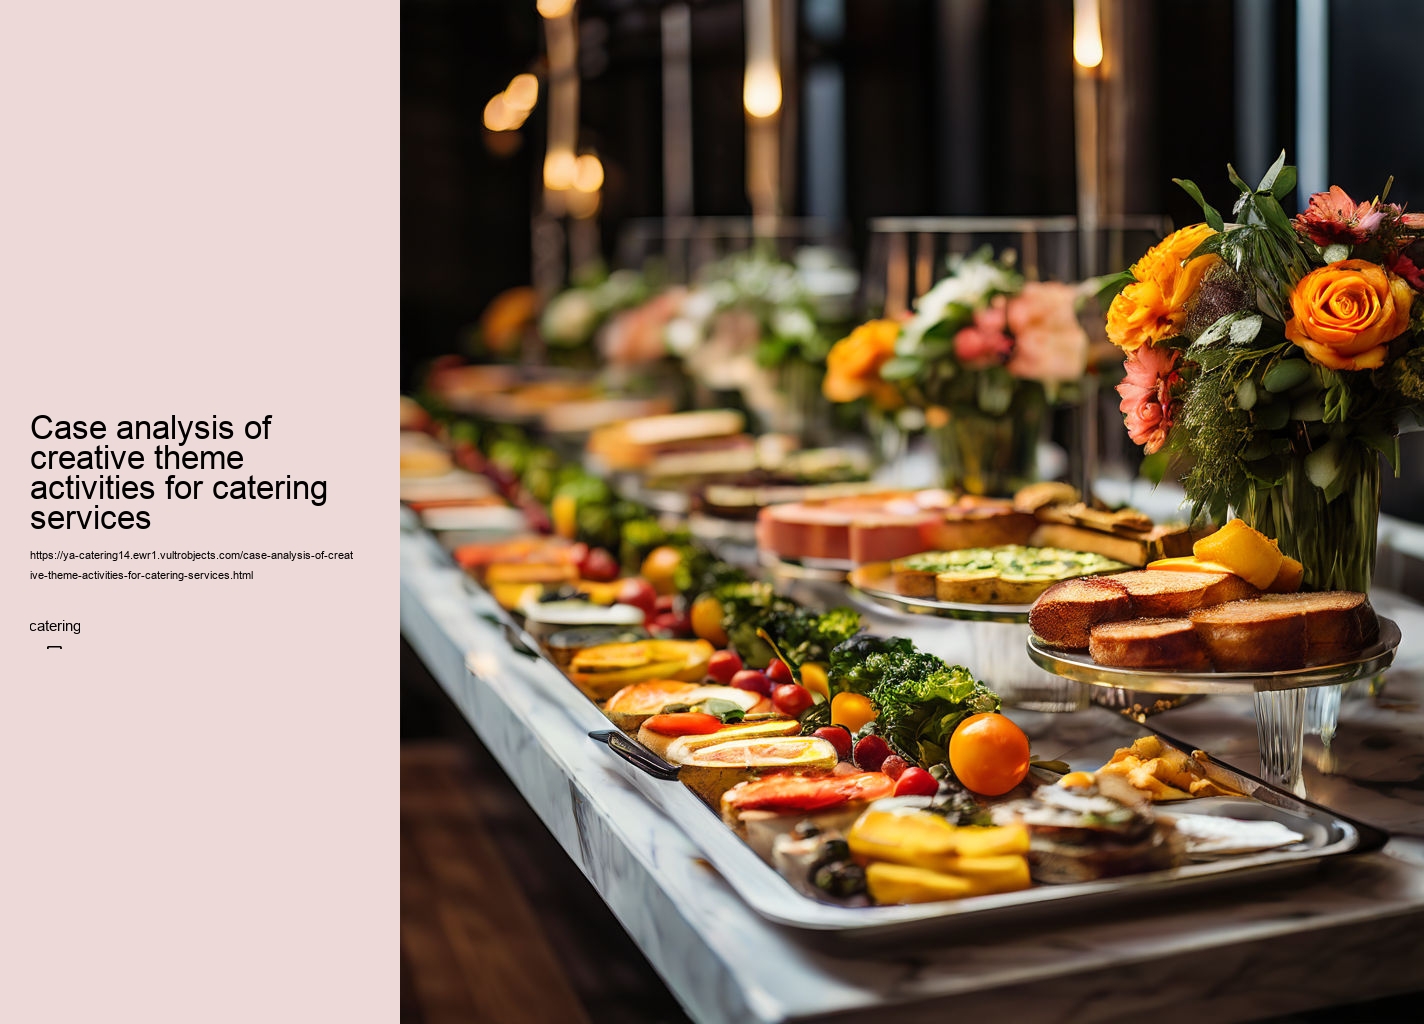 Case analysis of creative theme activities for catering services